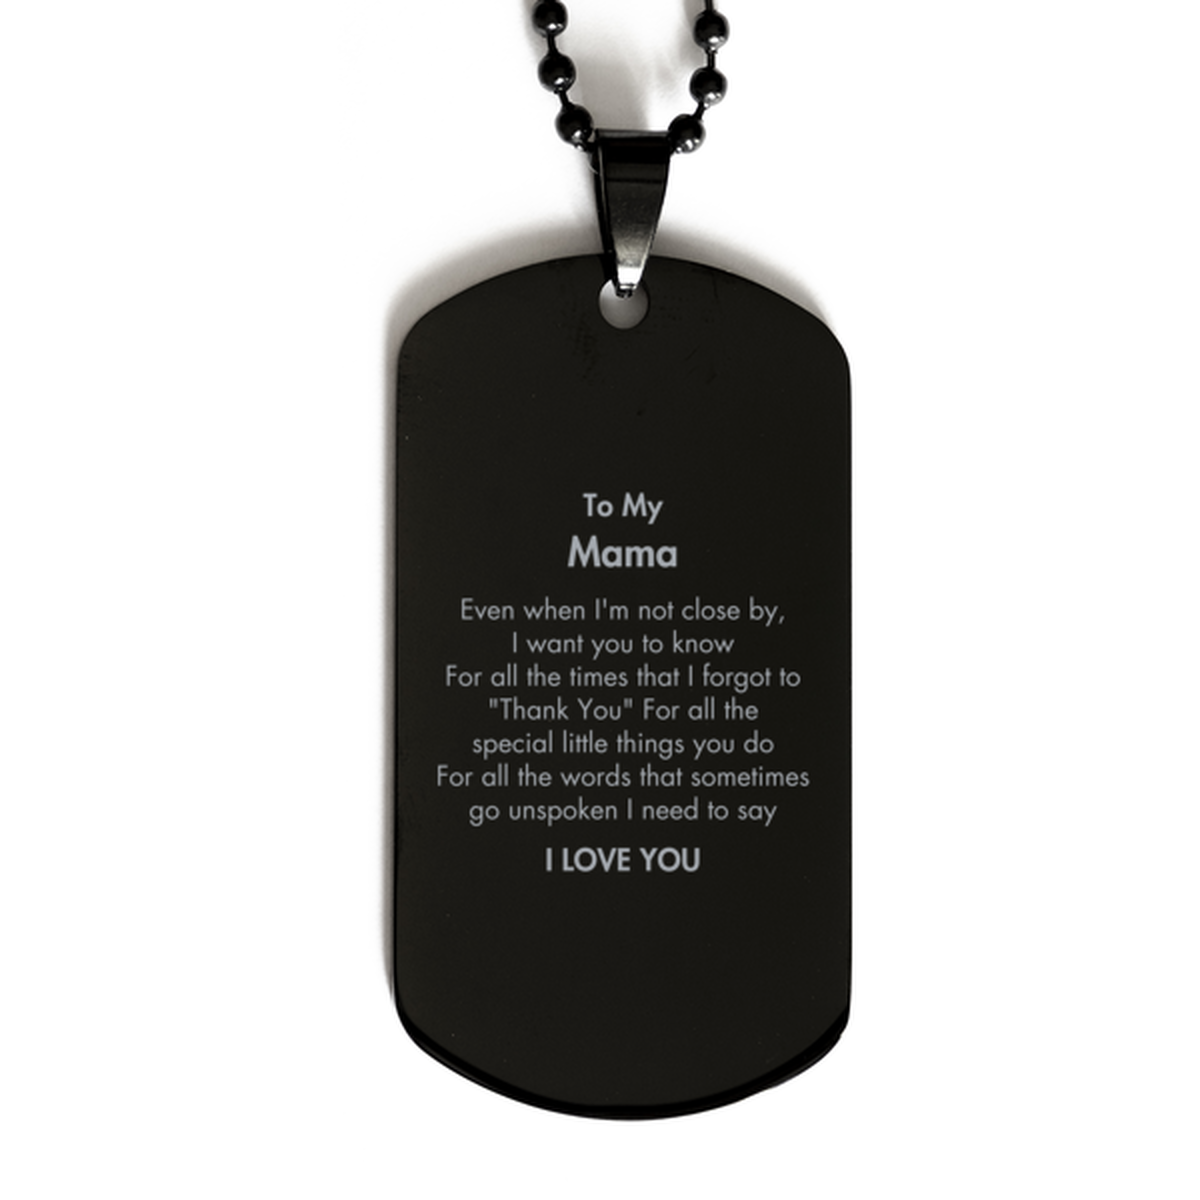 Thank You Gifts for Mama, Keepsake Black Dog Tag Gifts for Mama Birthday Mother's day Father's Day Mama For all the words That sometimes go unspoken I need to say I LOVE YOU